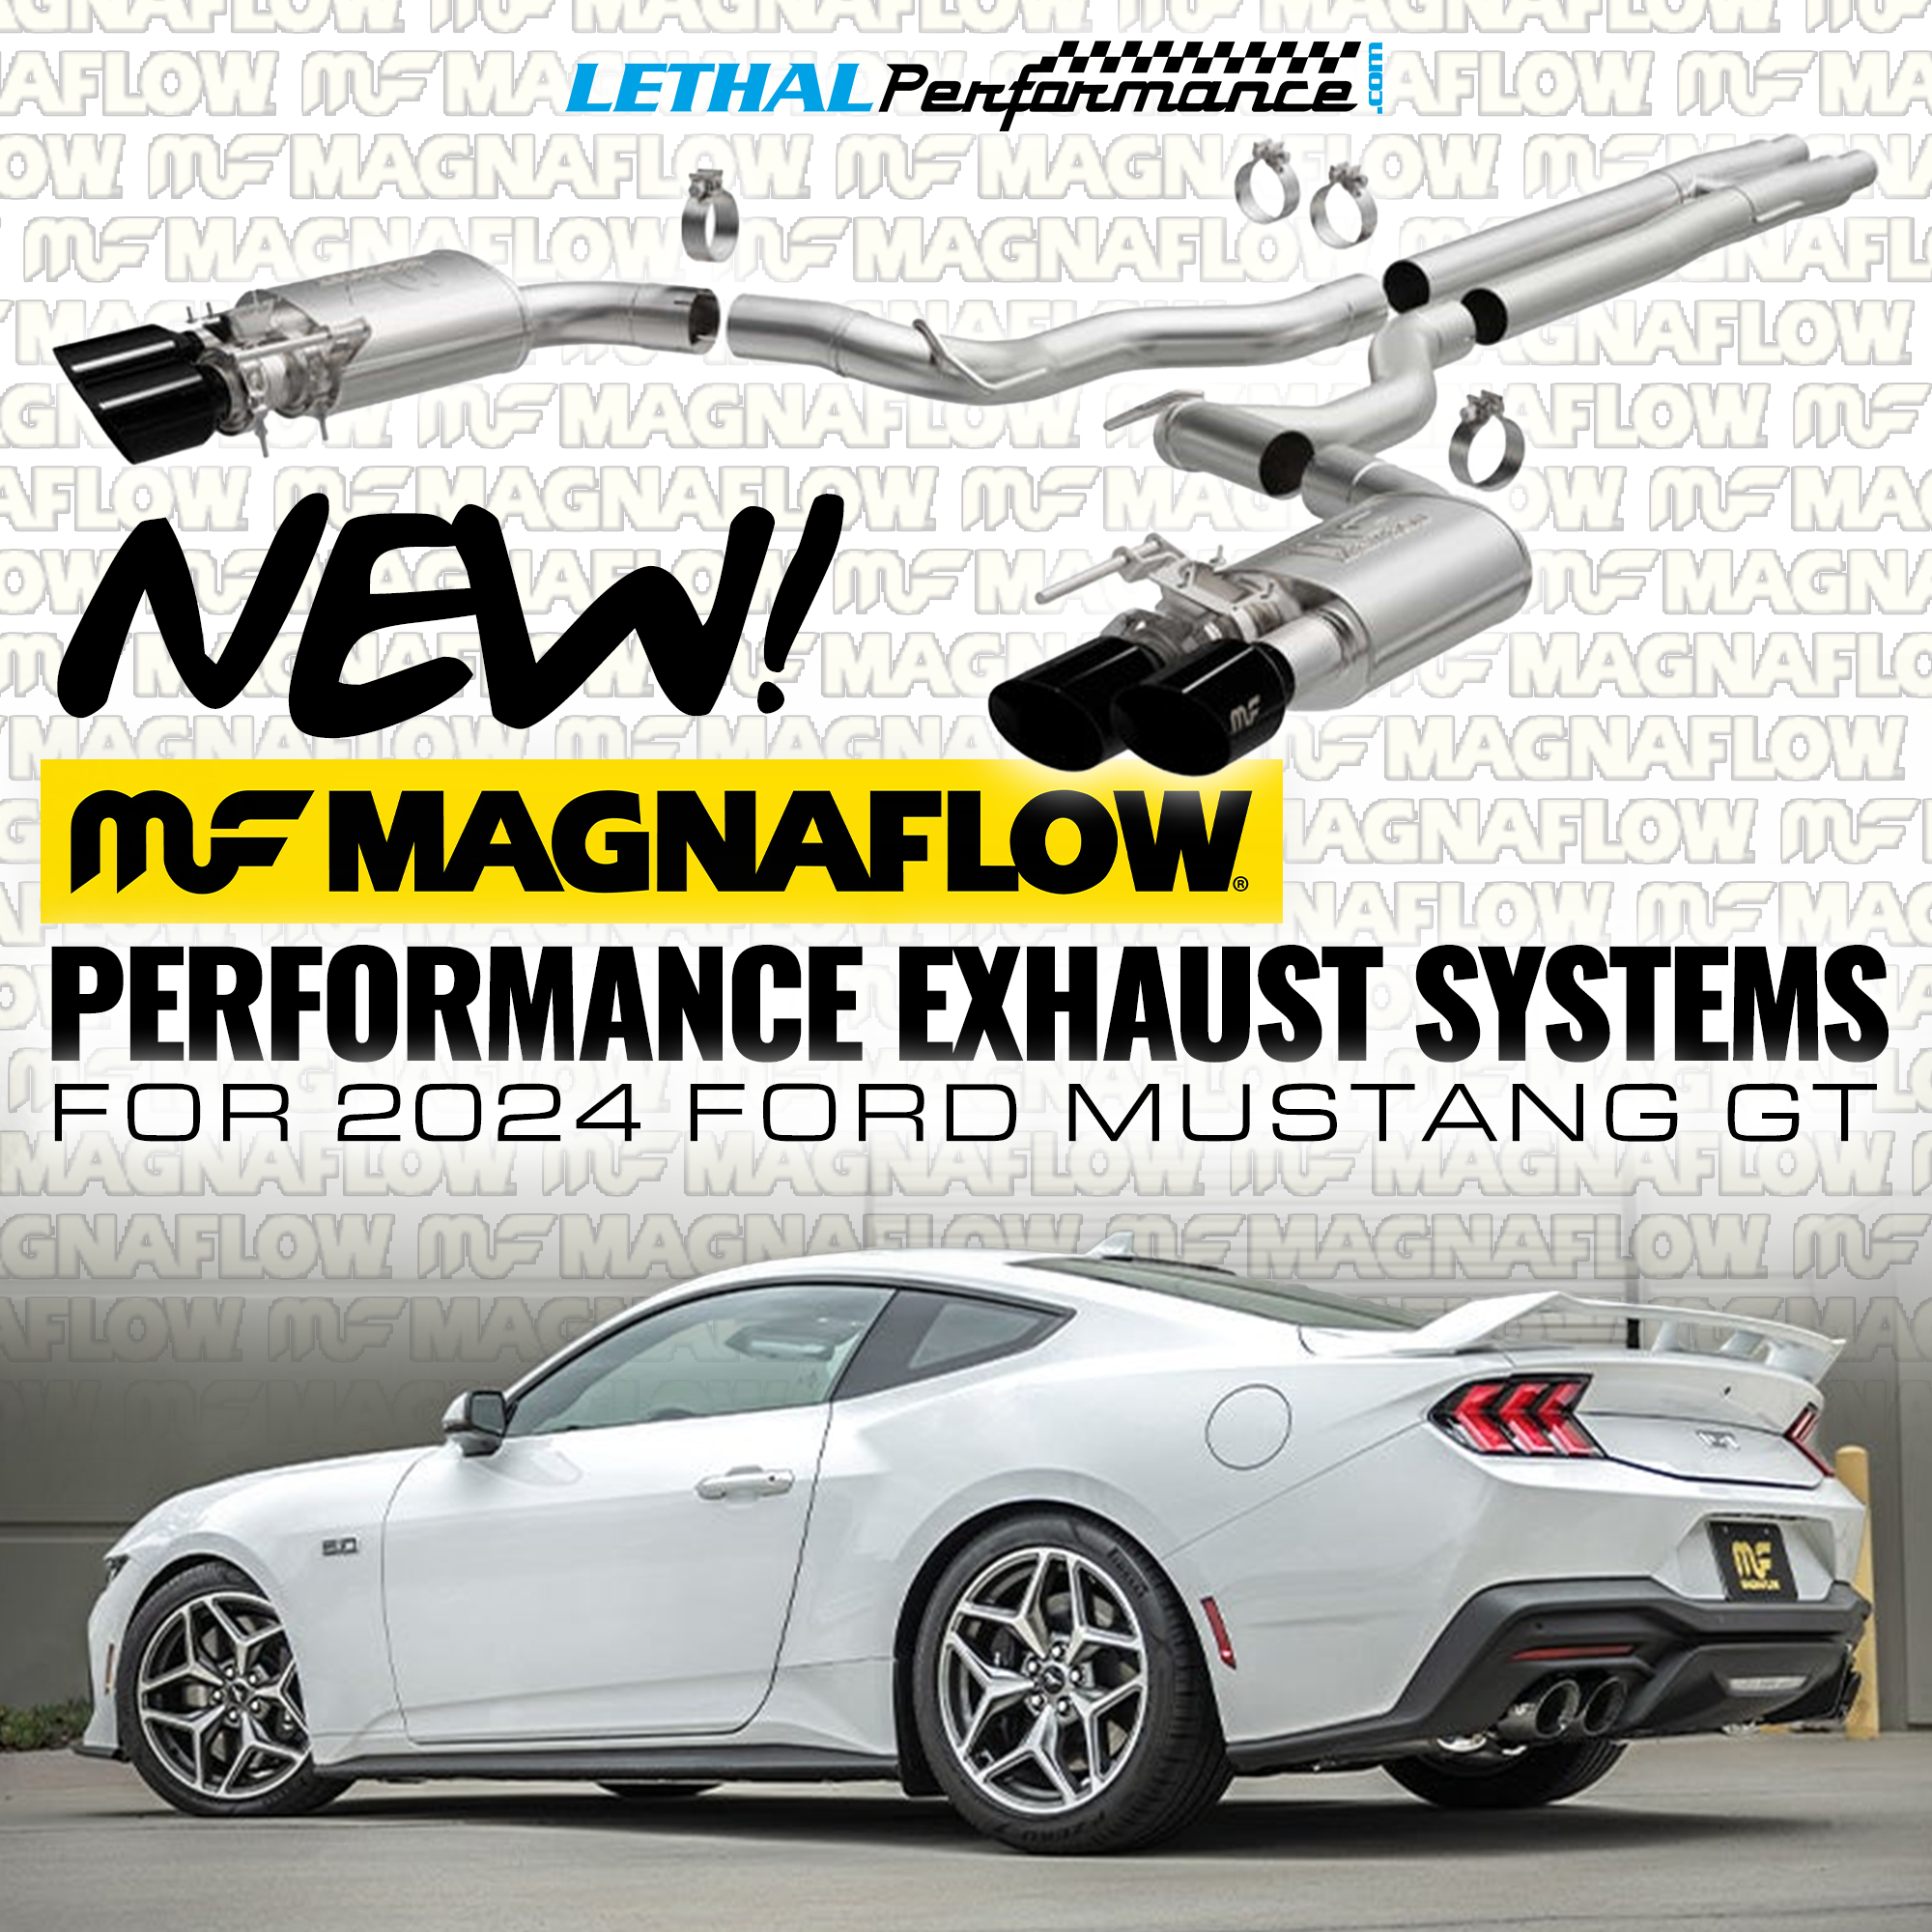 S650 Mustang Magnaflow Exhaust for 2024 Mustang GT’s NOW AVAILABLE! magnaflow 2024